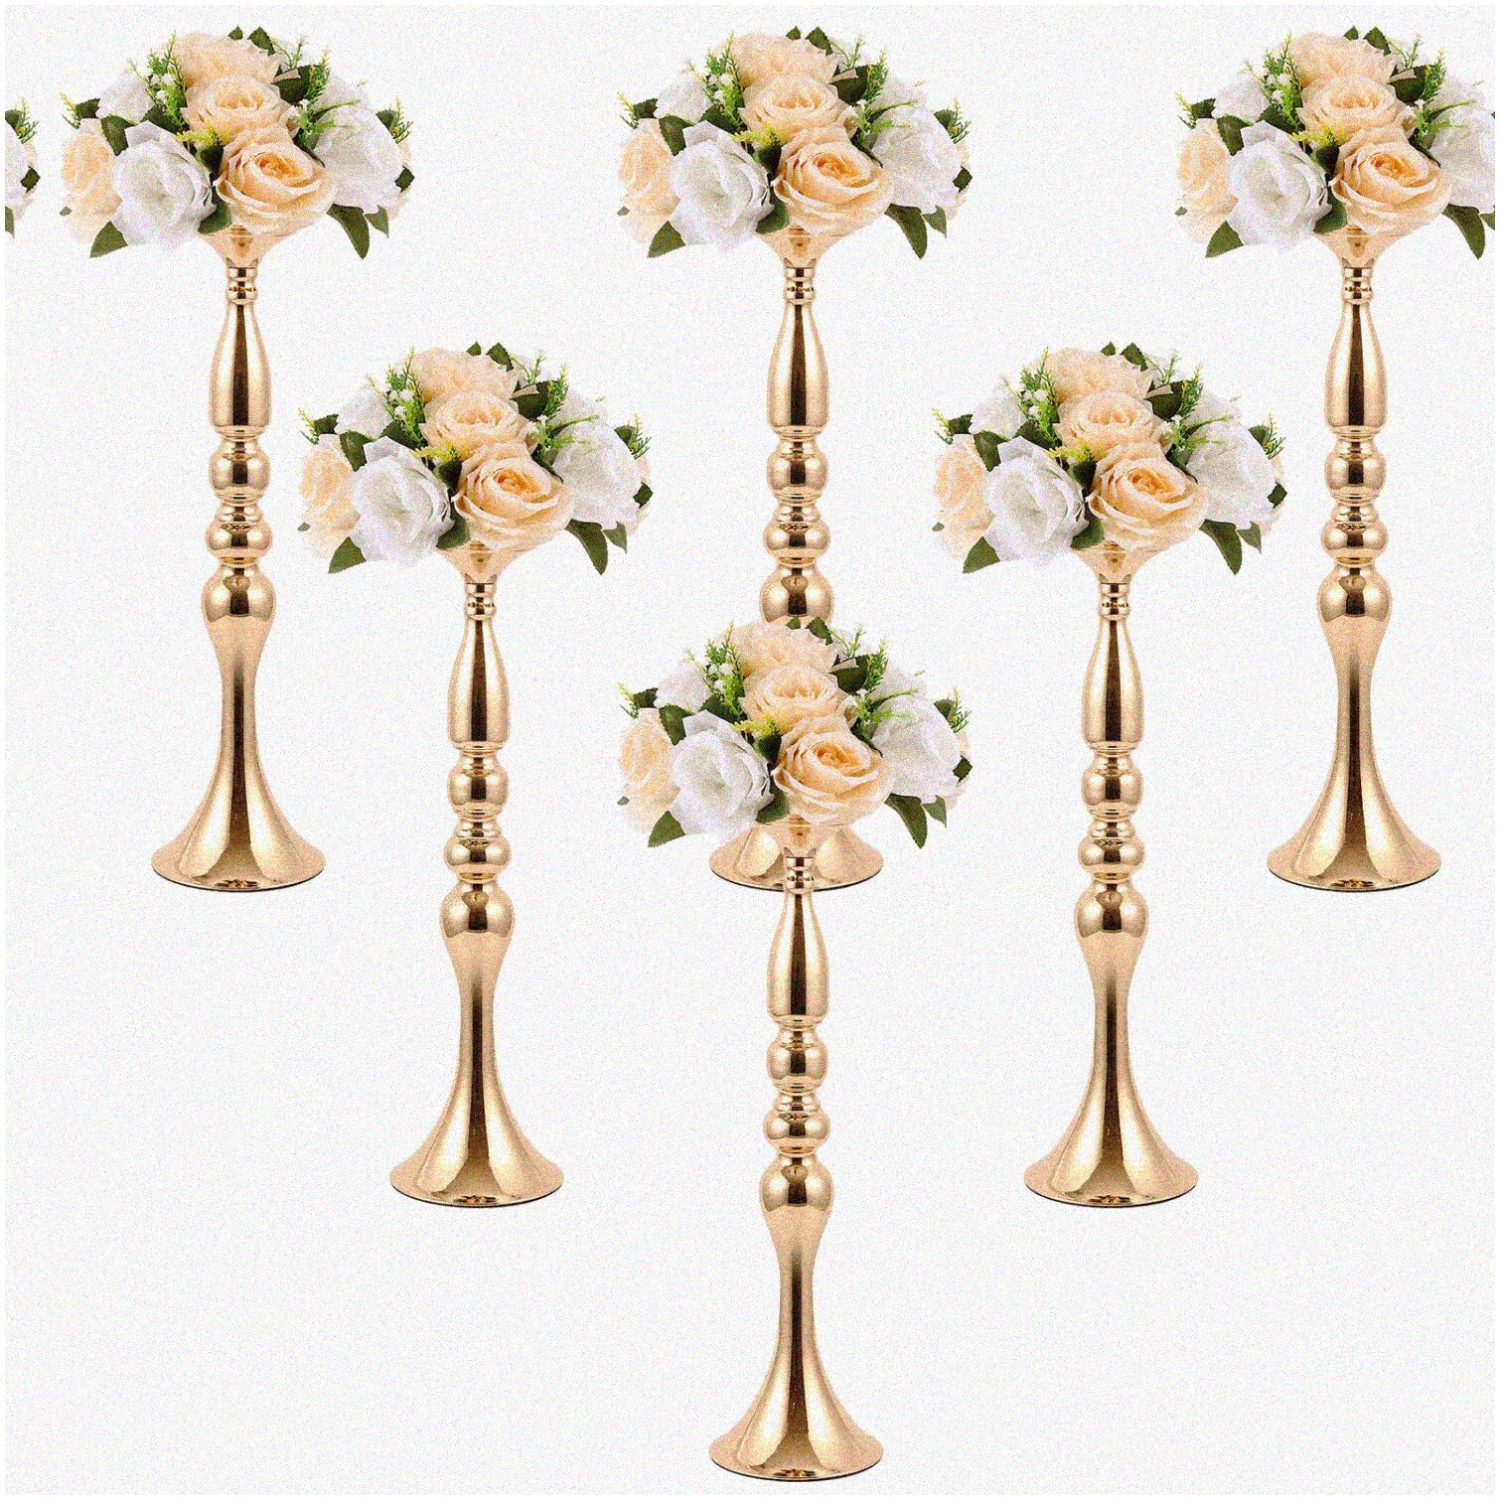 Golden Elegance: 6-Piece Metal Flower Centerpieces for Wedding Reception, Dinner Table, Holiday Party Decor. Enhance your Table Flower Vase Arrangements with this Candleholder Stan